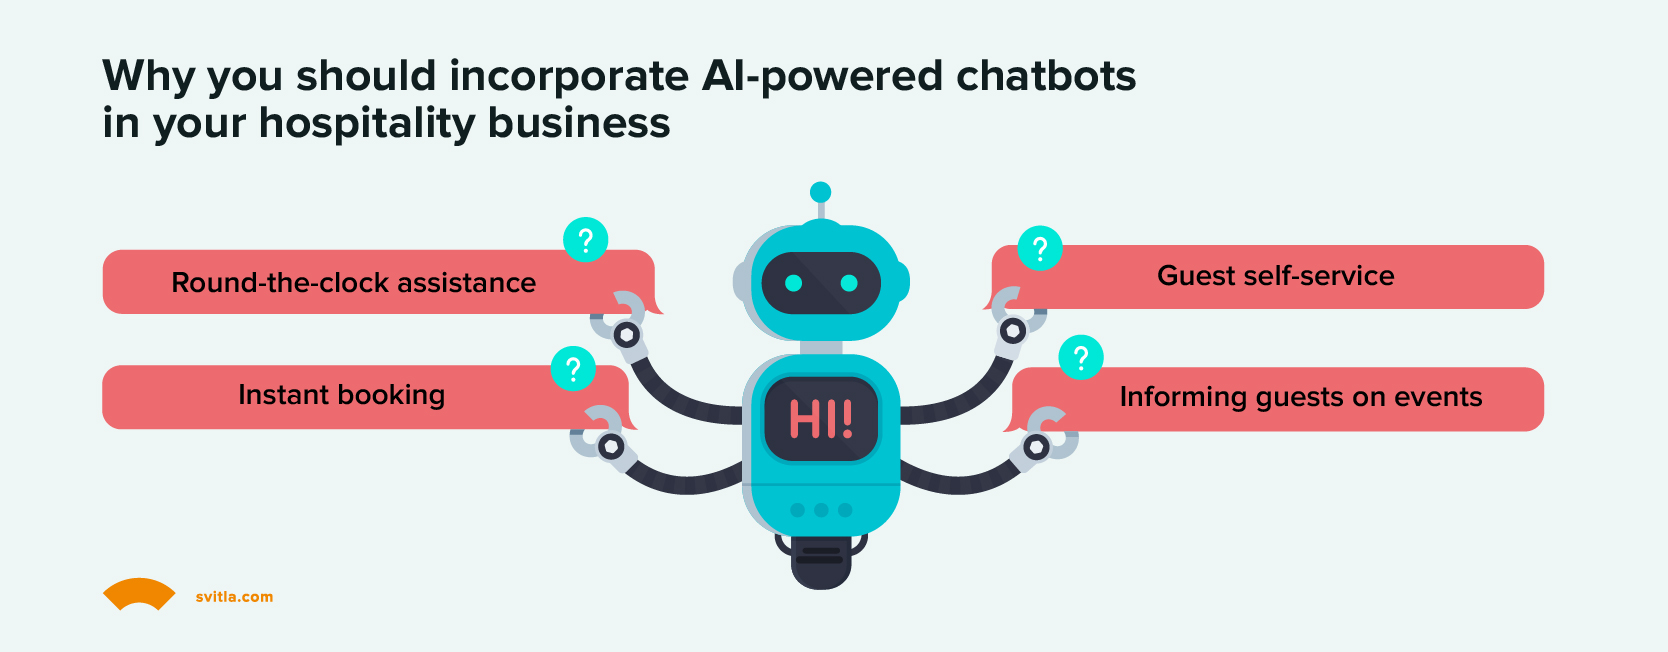 Why use chatbots for personalization in the hospitality industry